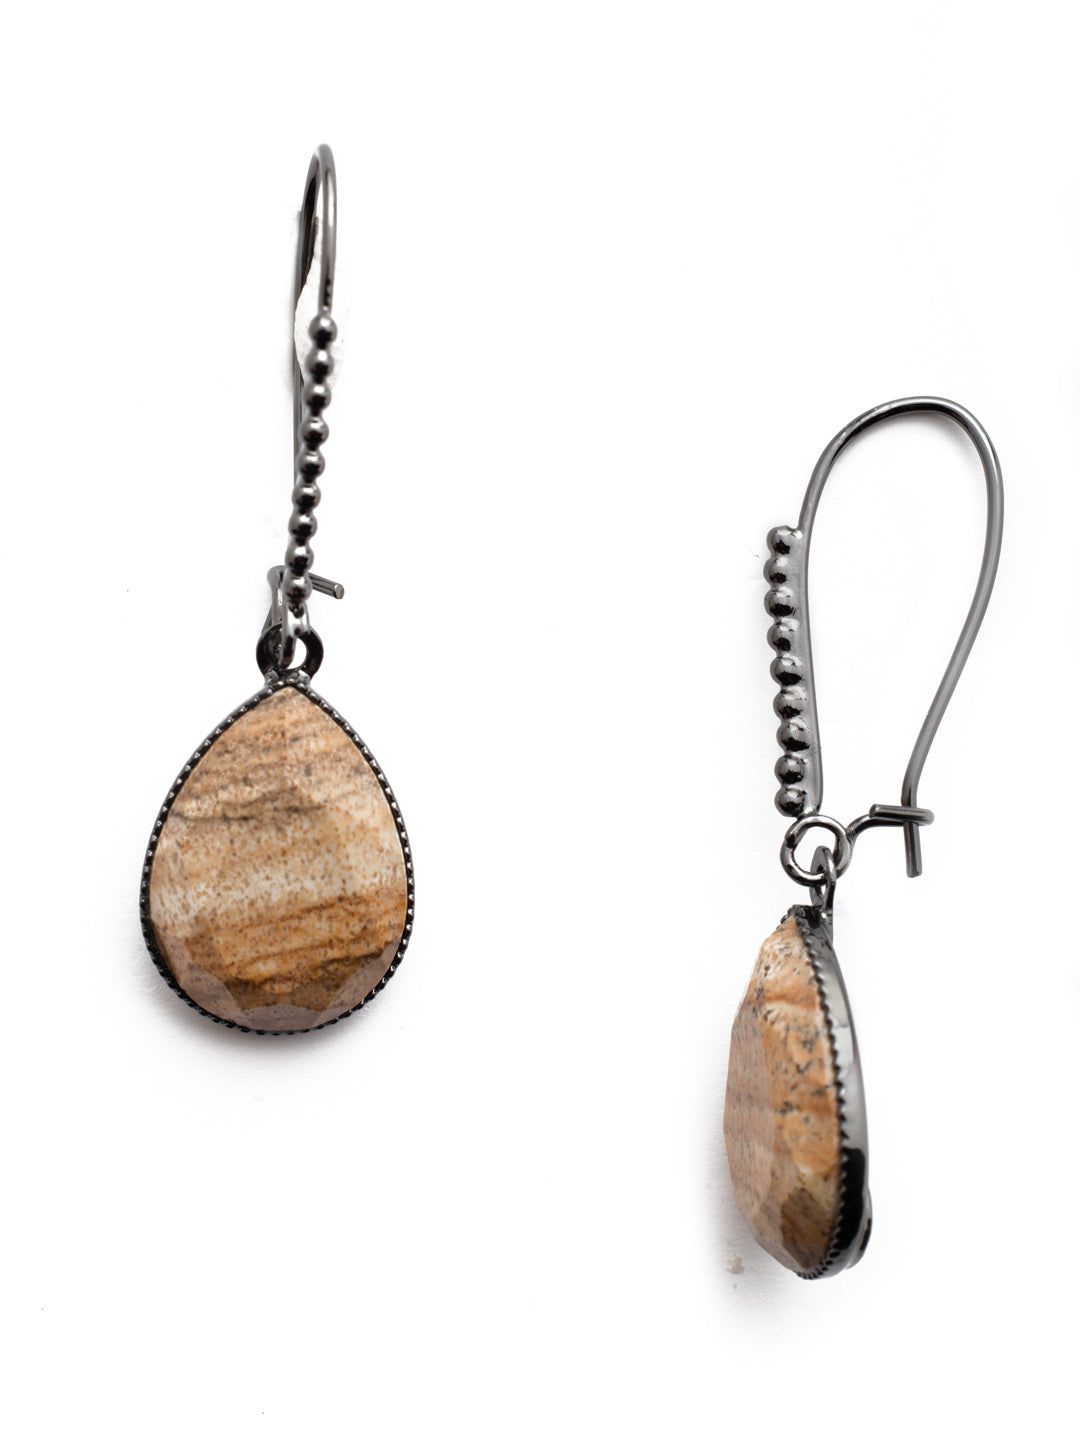 Arizona Dangle Earrings - EEU13GMGNS - If you love an earthy feel to your jewelry, grab our Arizona Dangle Earrings featuring rich, pear-shaped mineral stones. From Sorrelli's Golden Shadow collection in our Gun Metal finish.